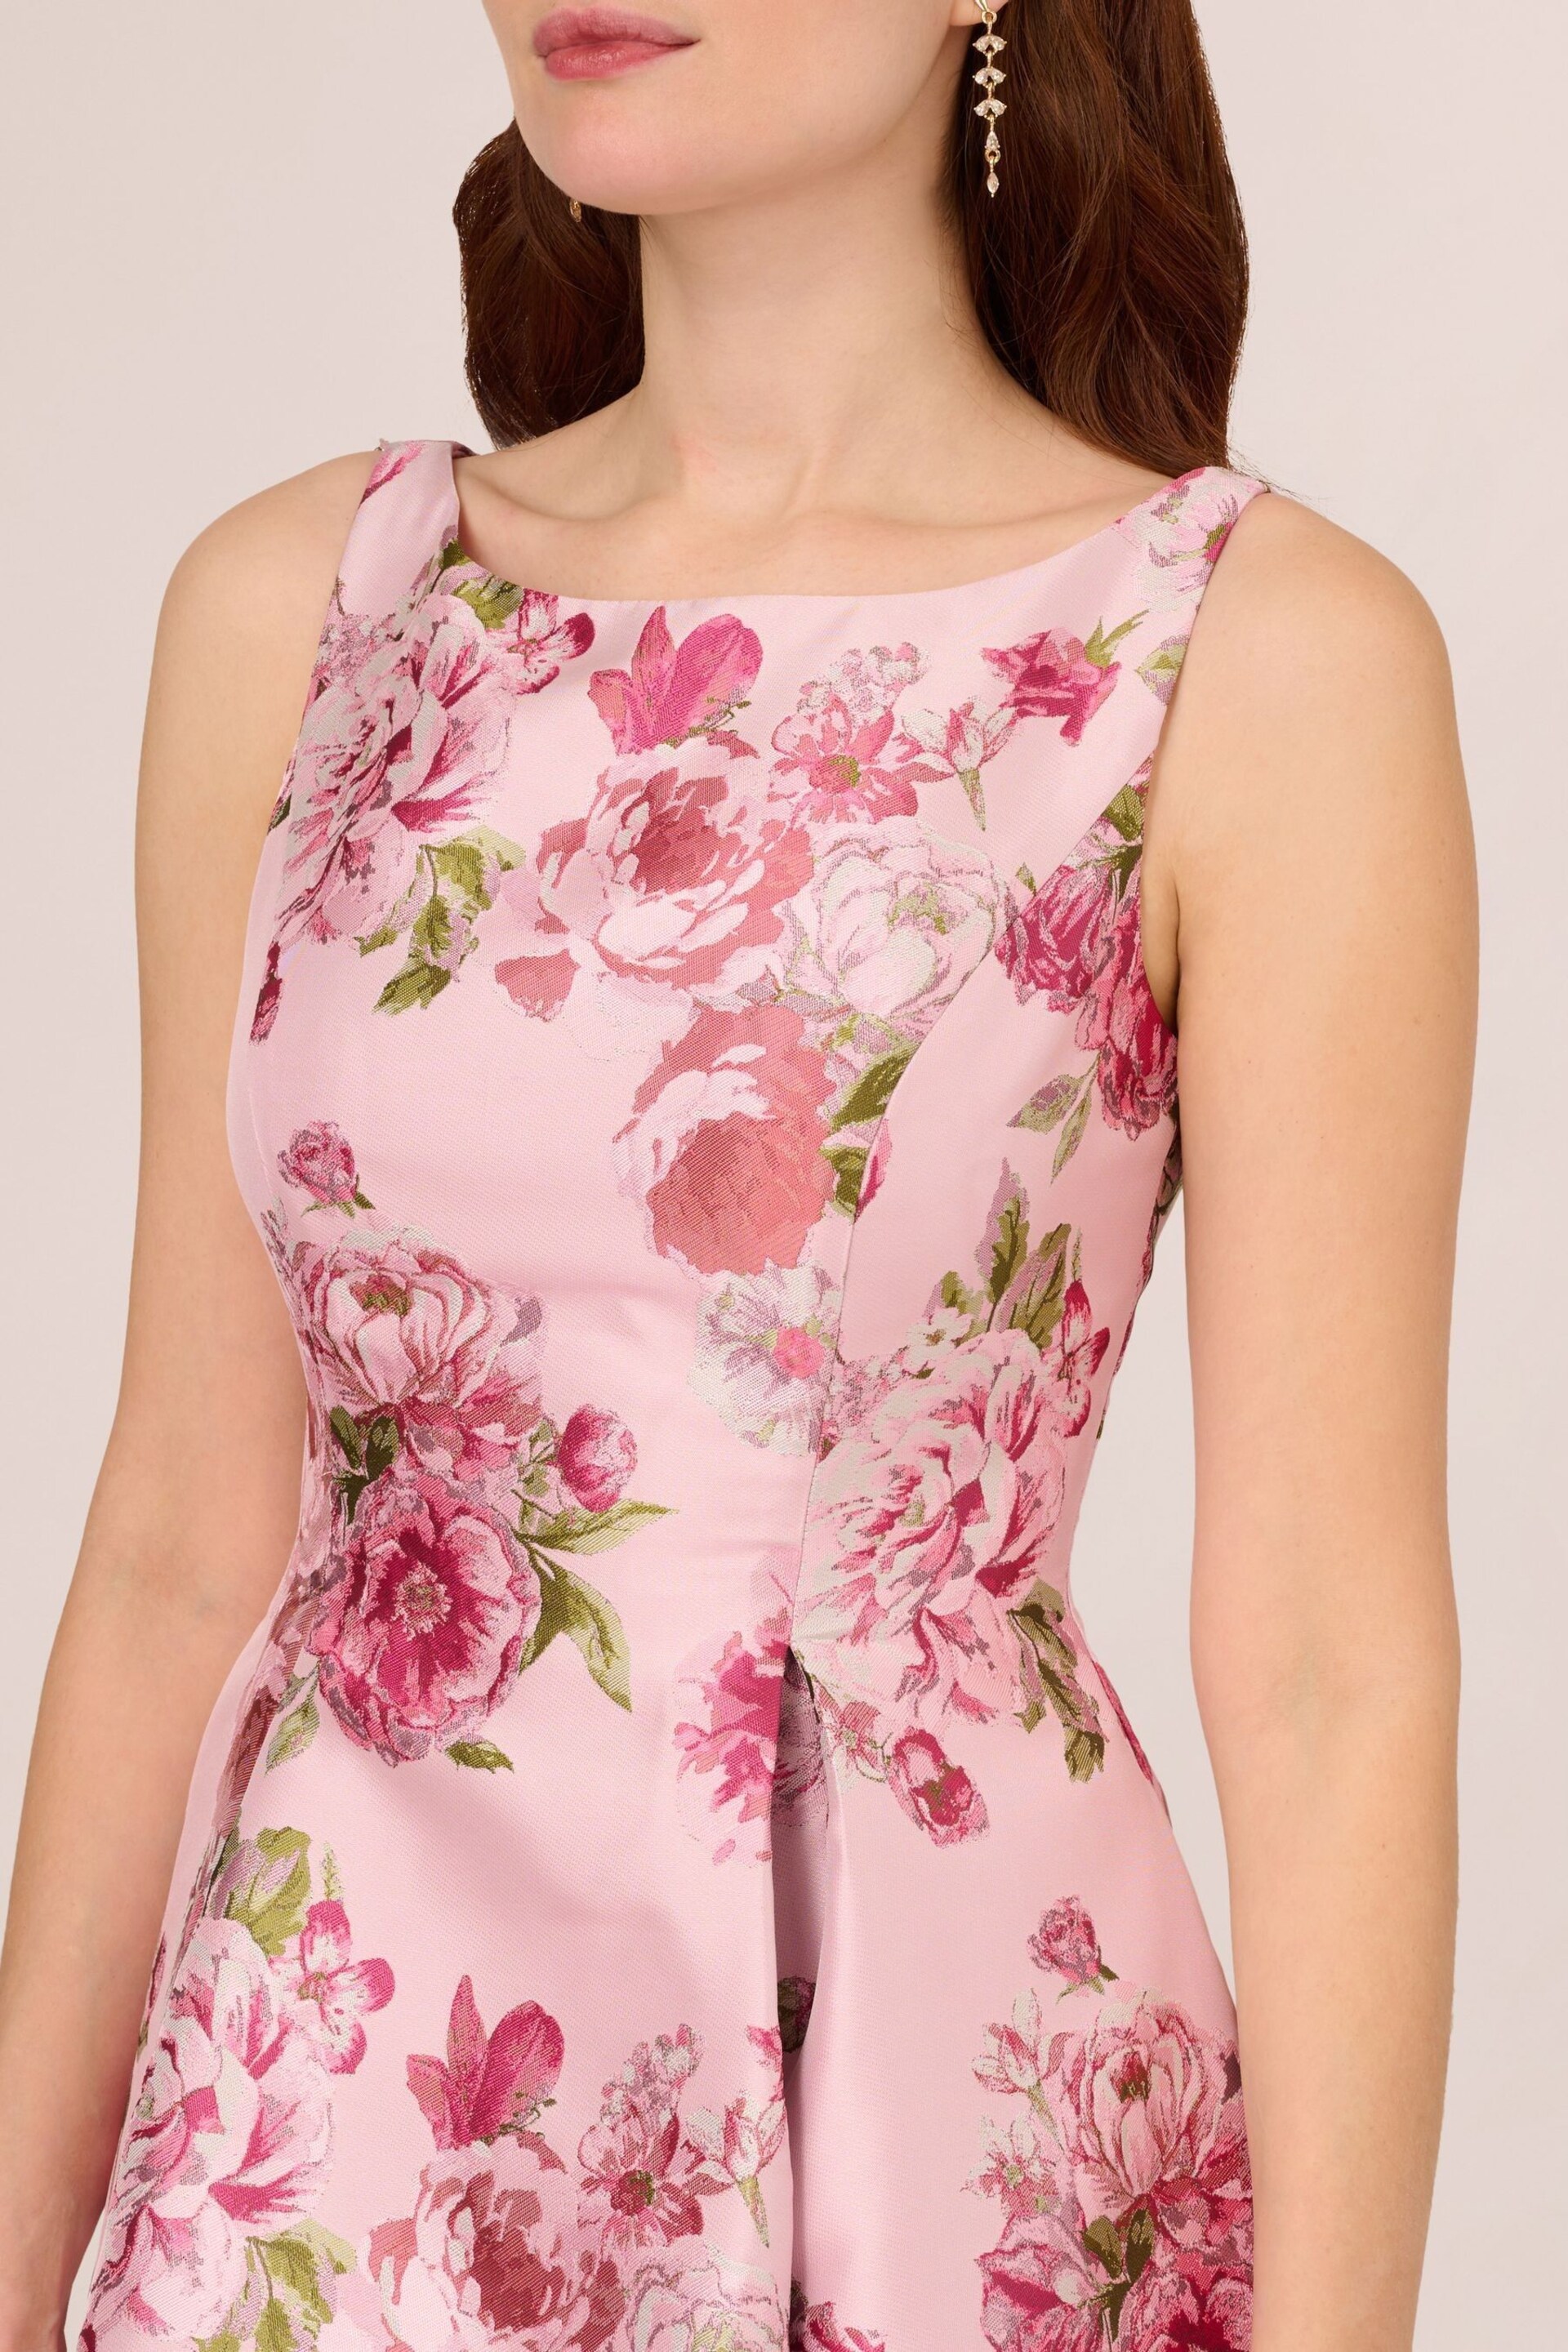 Adrianna Papell Pink Jacquard Flared Dress - Image 4 of 7